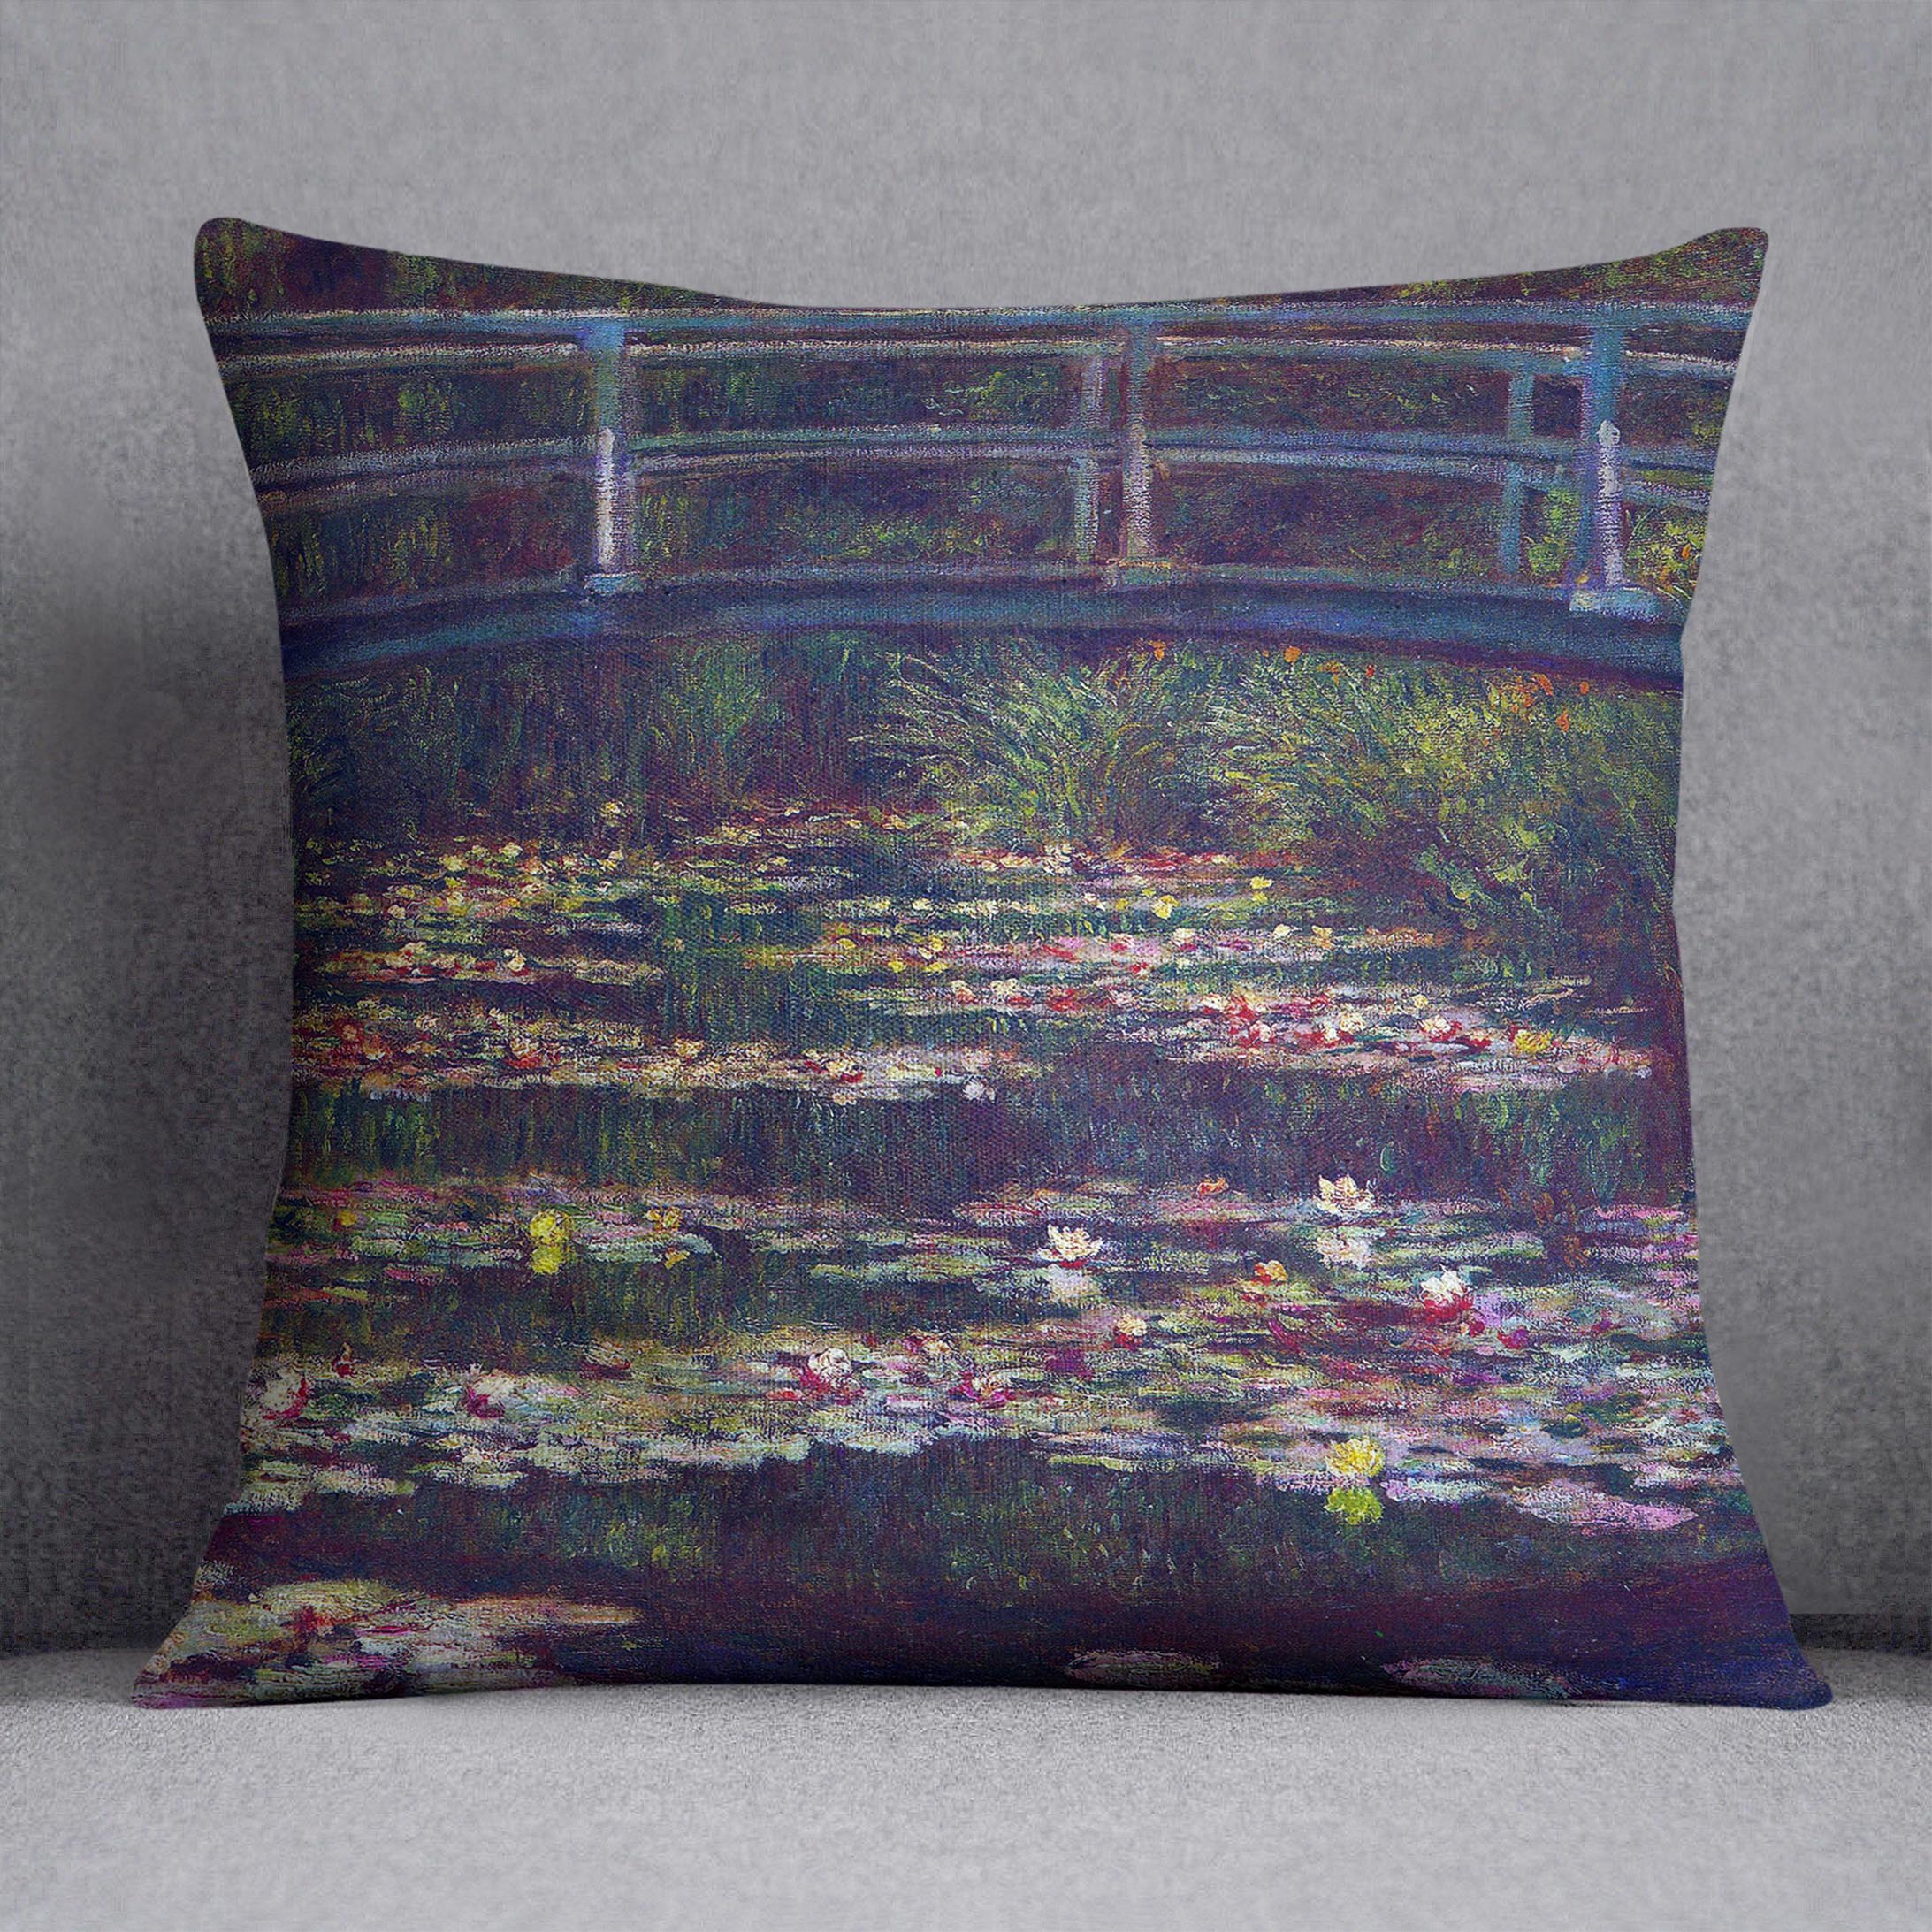 Water Lily Pond 5 by Monet Cushion